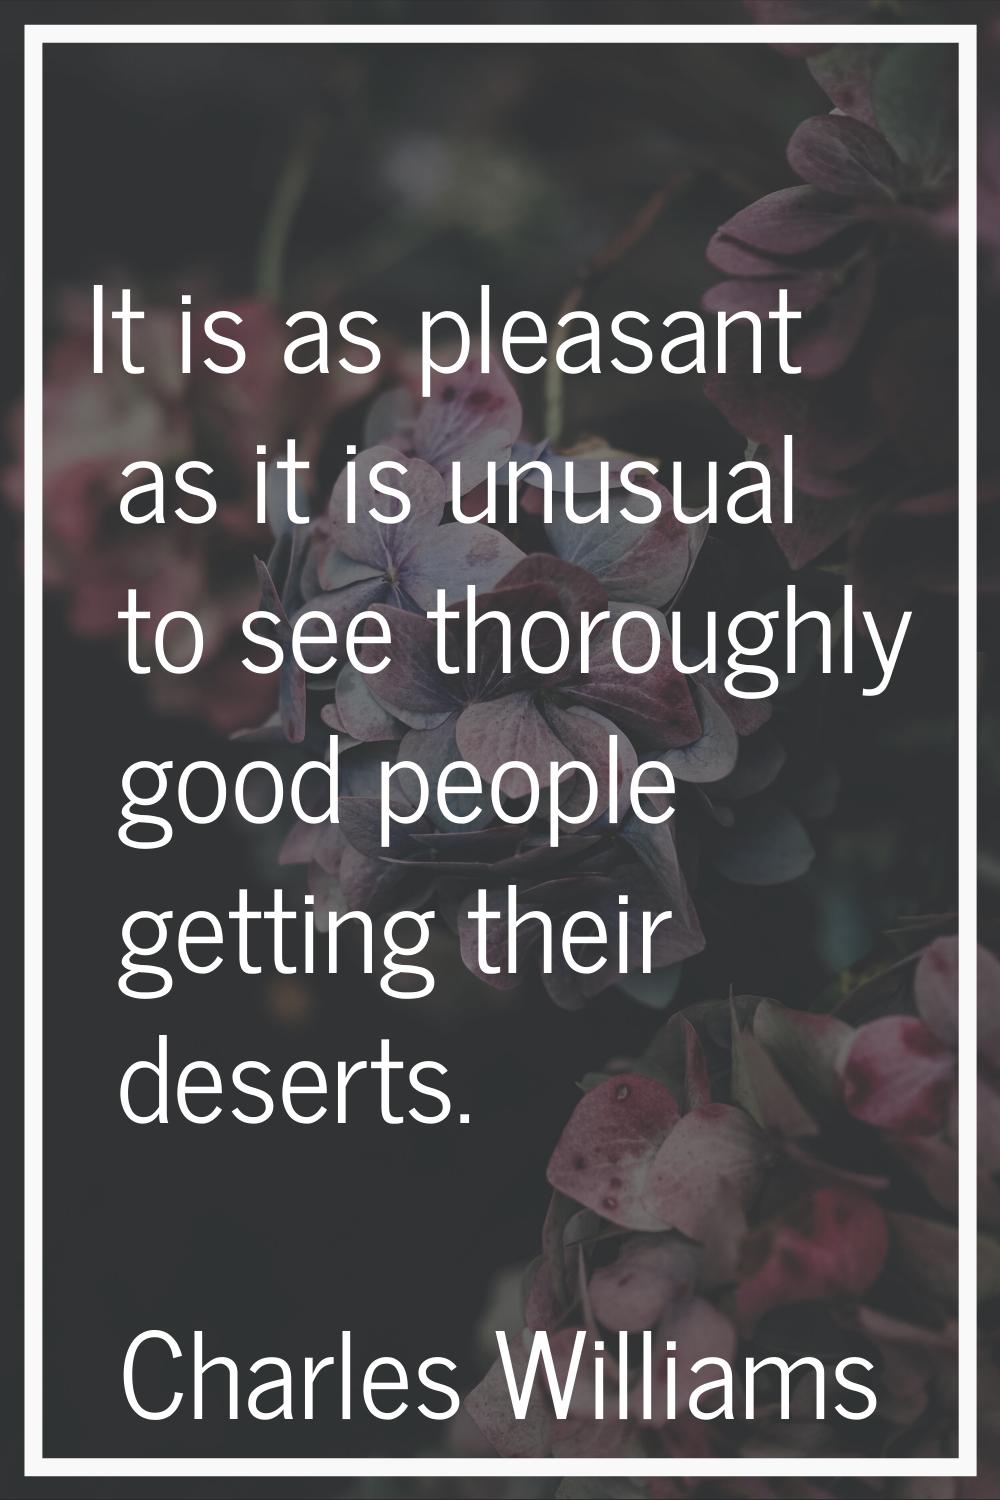 It is as pleasant as it is unusual to see thoroughly good people getting their deserts.